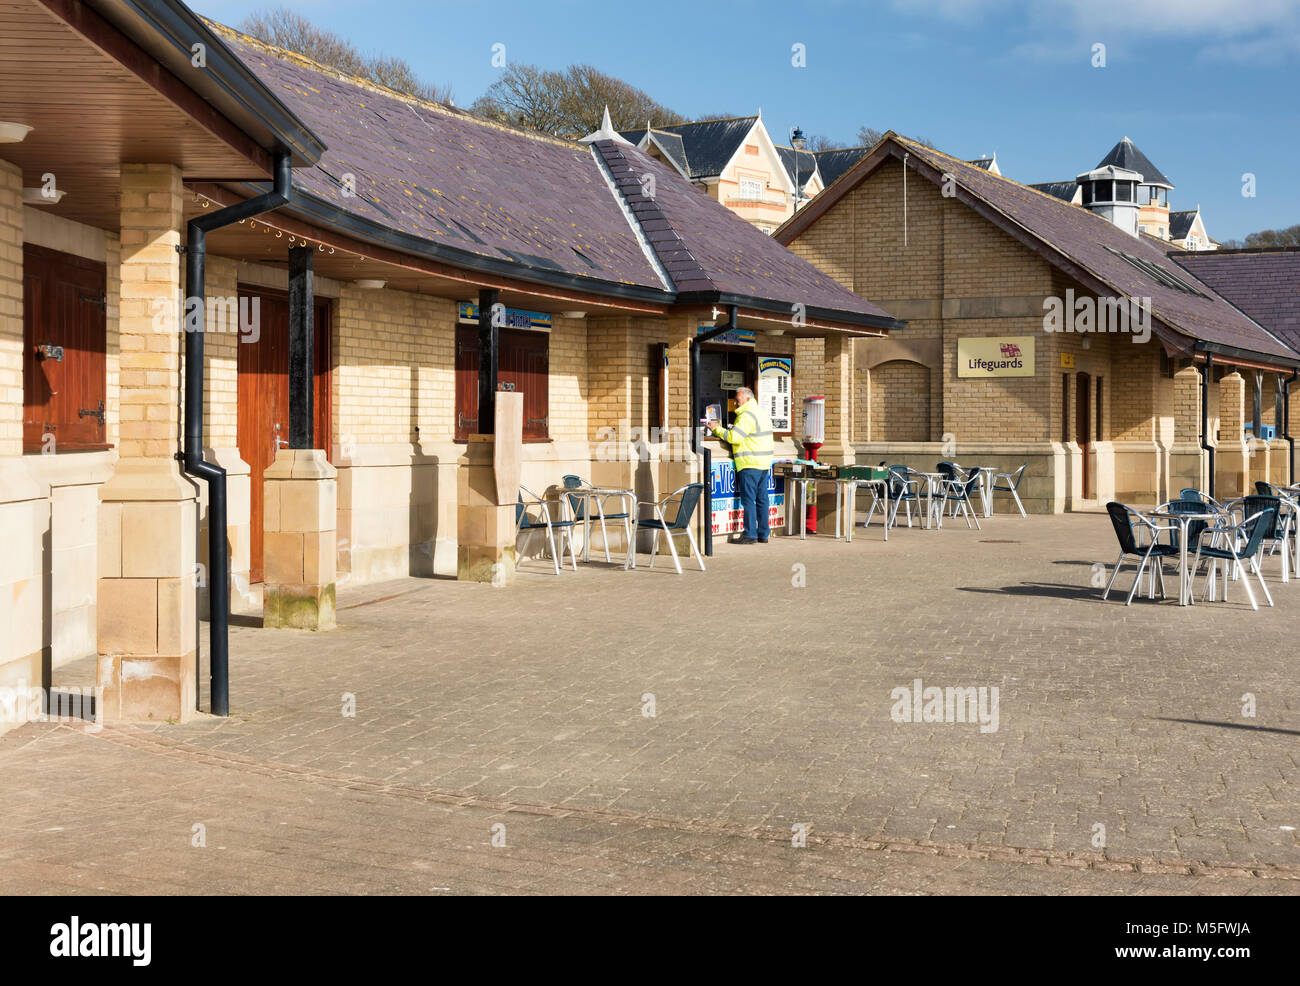 A cafe on the sea front promenade at Filey Stock Photo